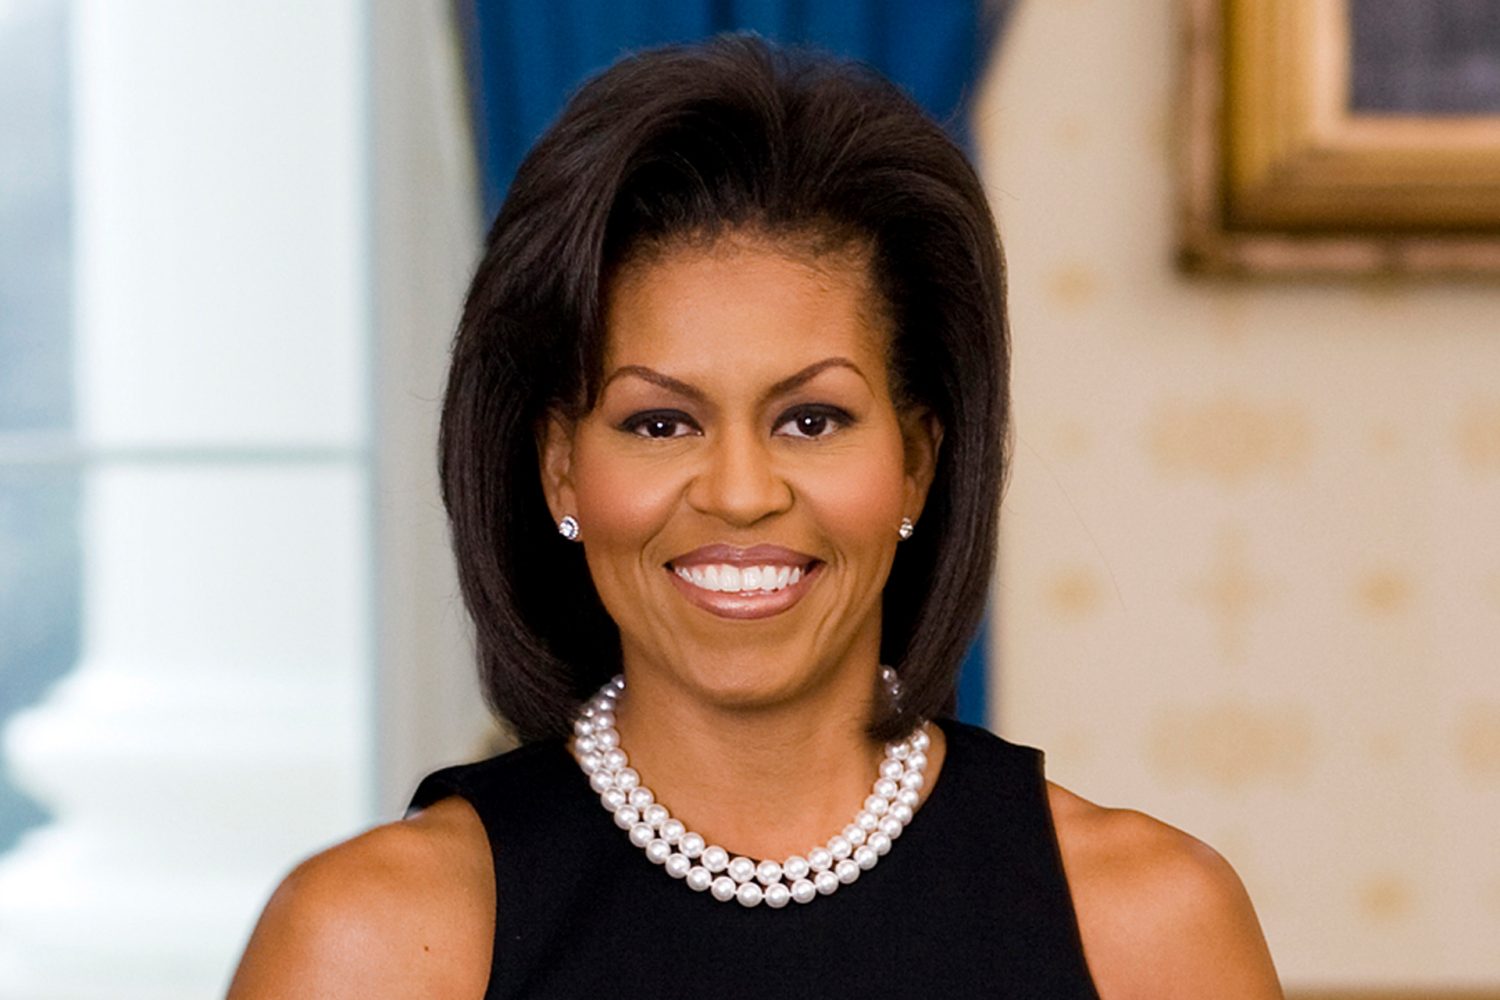 How Michelle Obama's Blackish Cameo Compares To Parks & Rec's